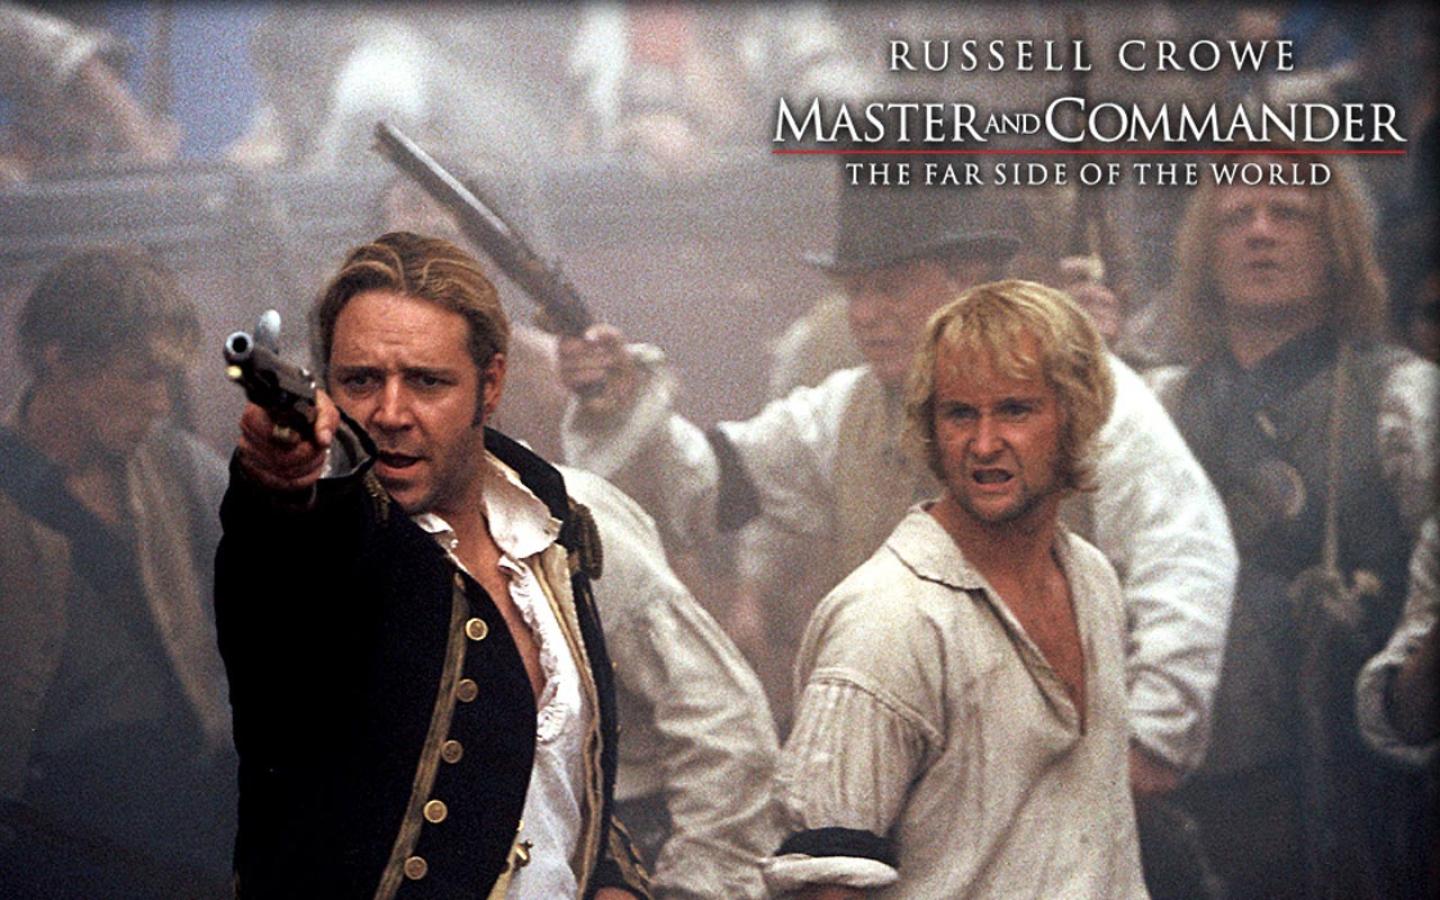 Master And Commander: The Far Side Of The World Wallpaper #4 1440 x 900 